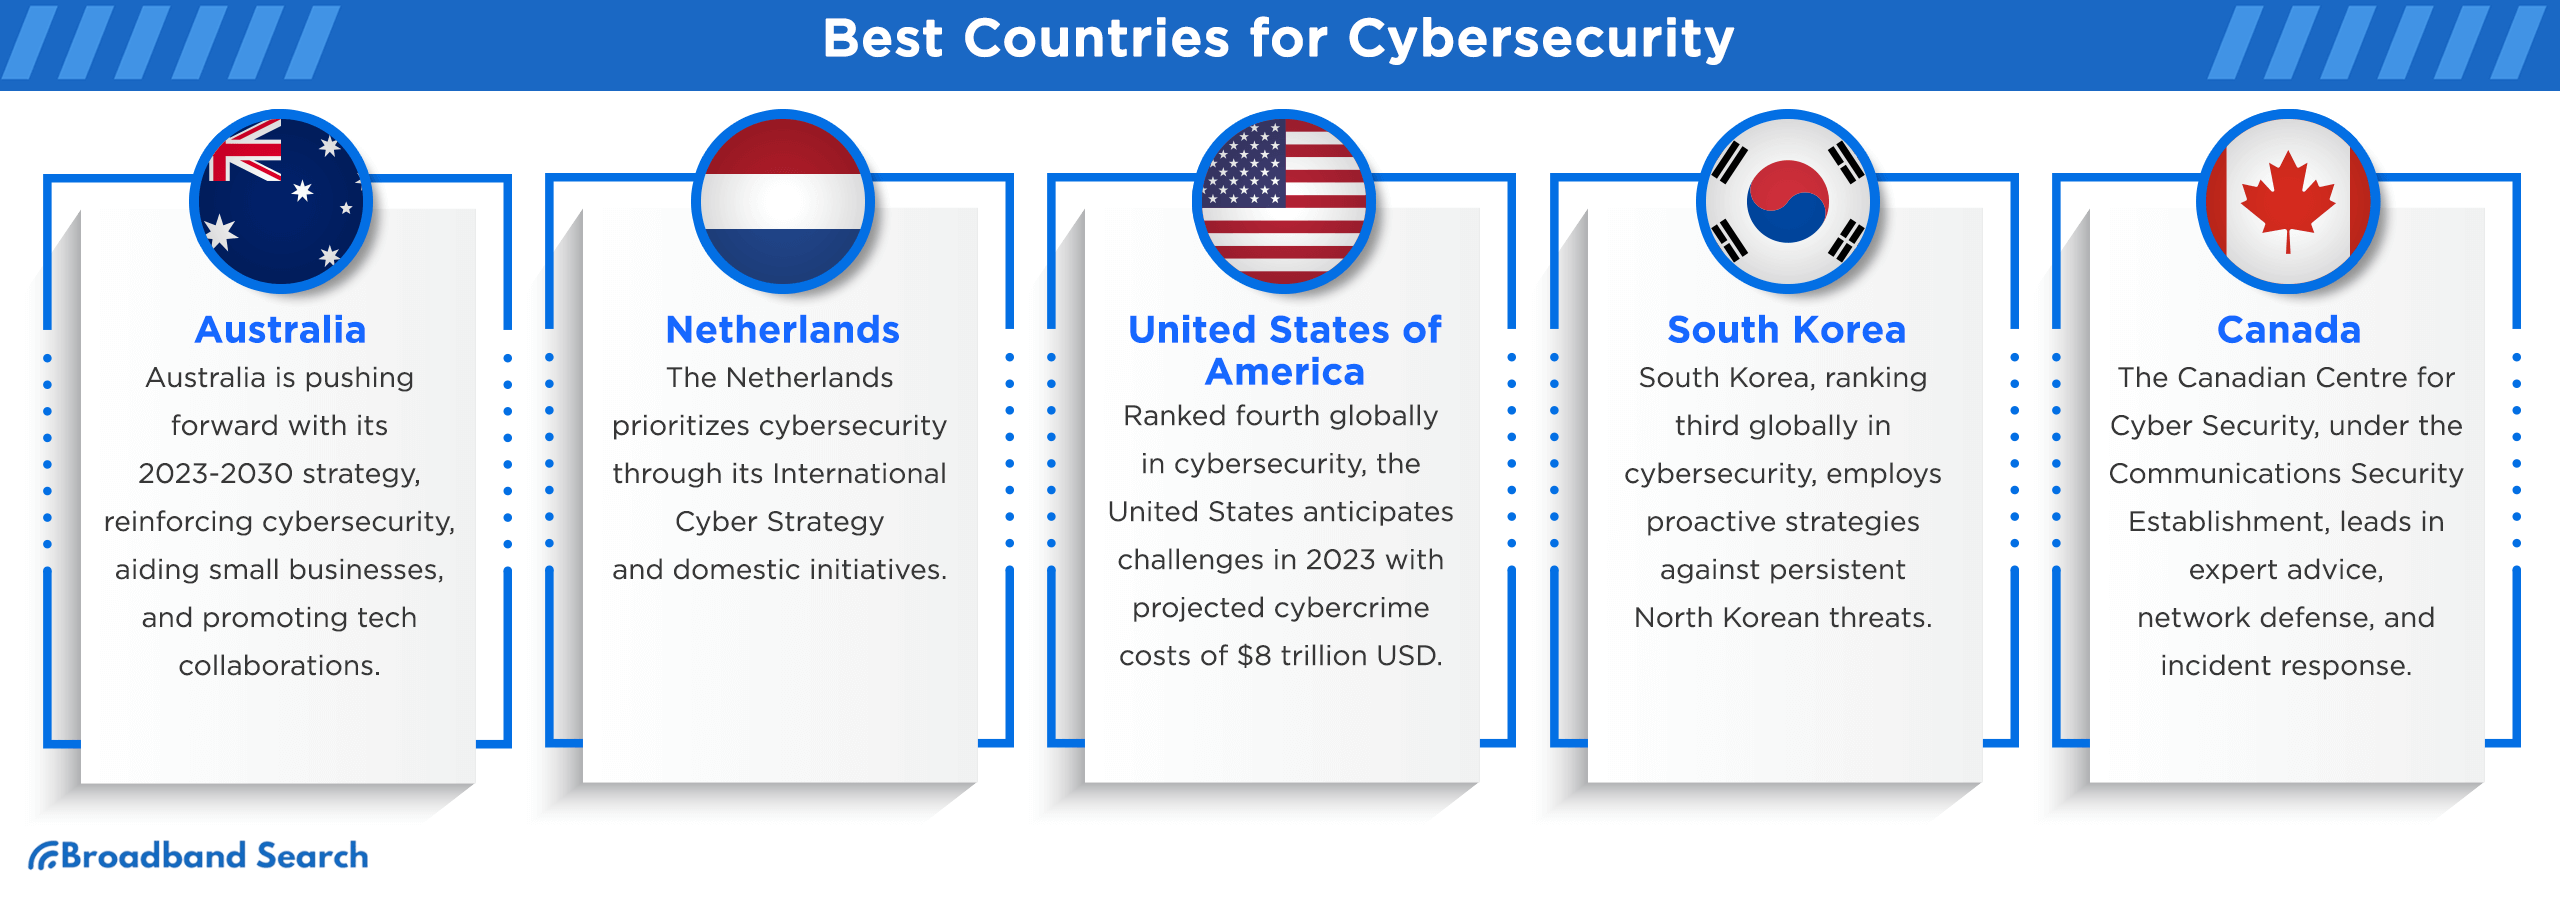 List of best countries for cybersecurity